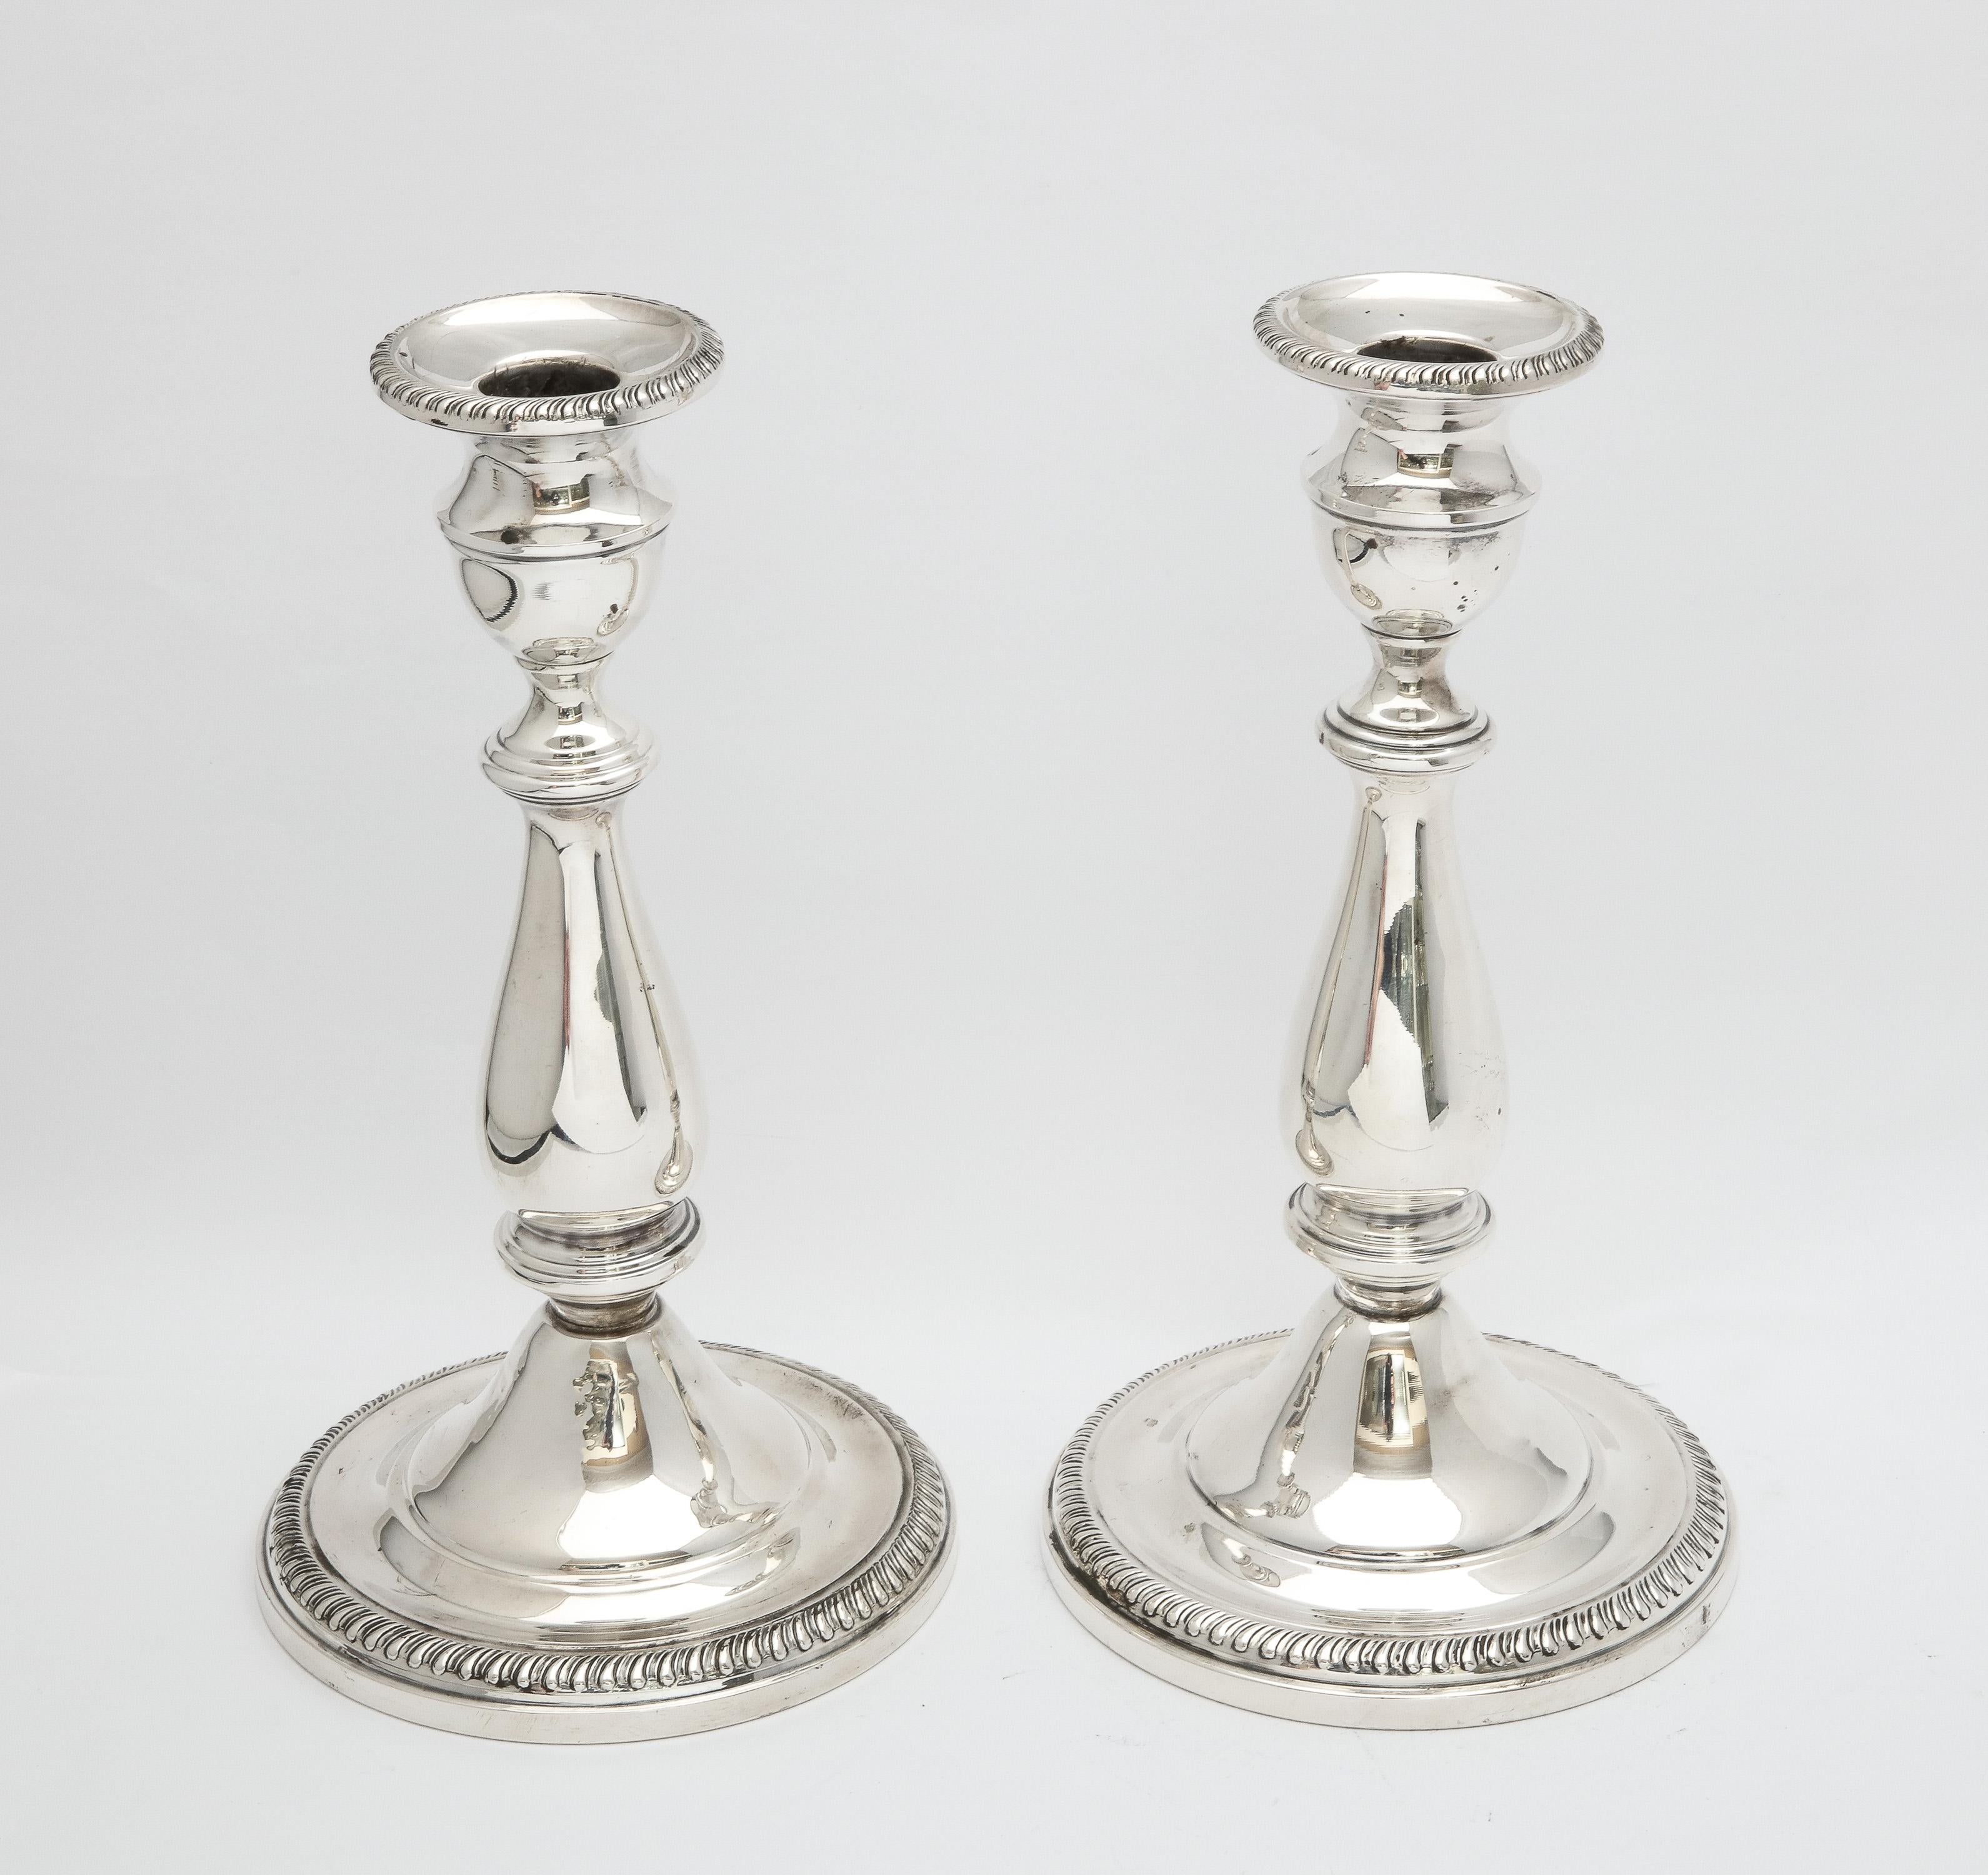 Edwardian-Style Pair of Sterling Silver Candlesticks  For Sale 7